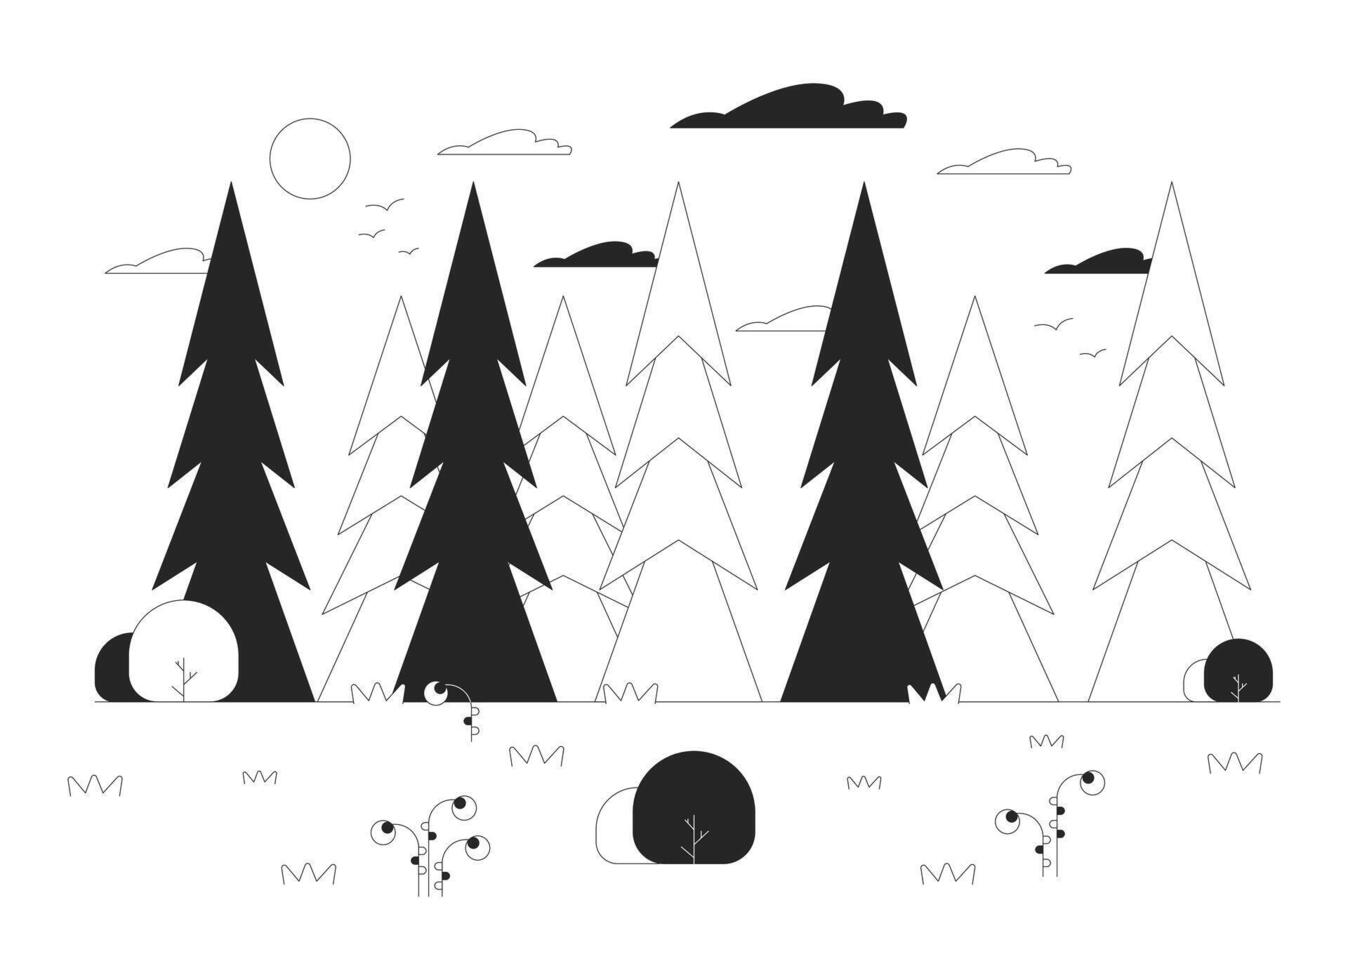 Deep pine forest black and white cartoon flat illustration. Wanderlust leisure. Fir trees growing near grassy glade 2D lineart objects isolated. Discovery nature monochrome scene outline image vector